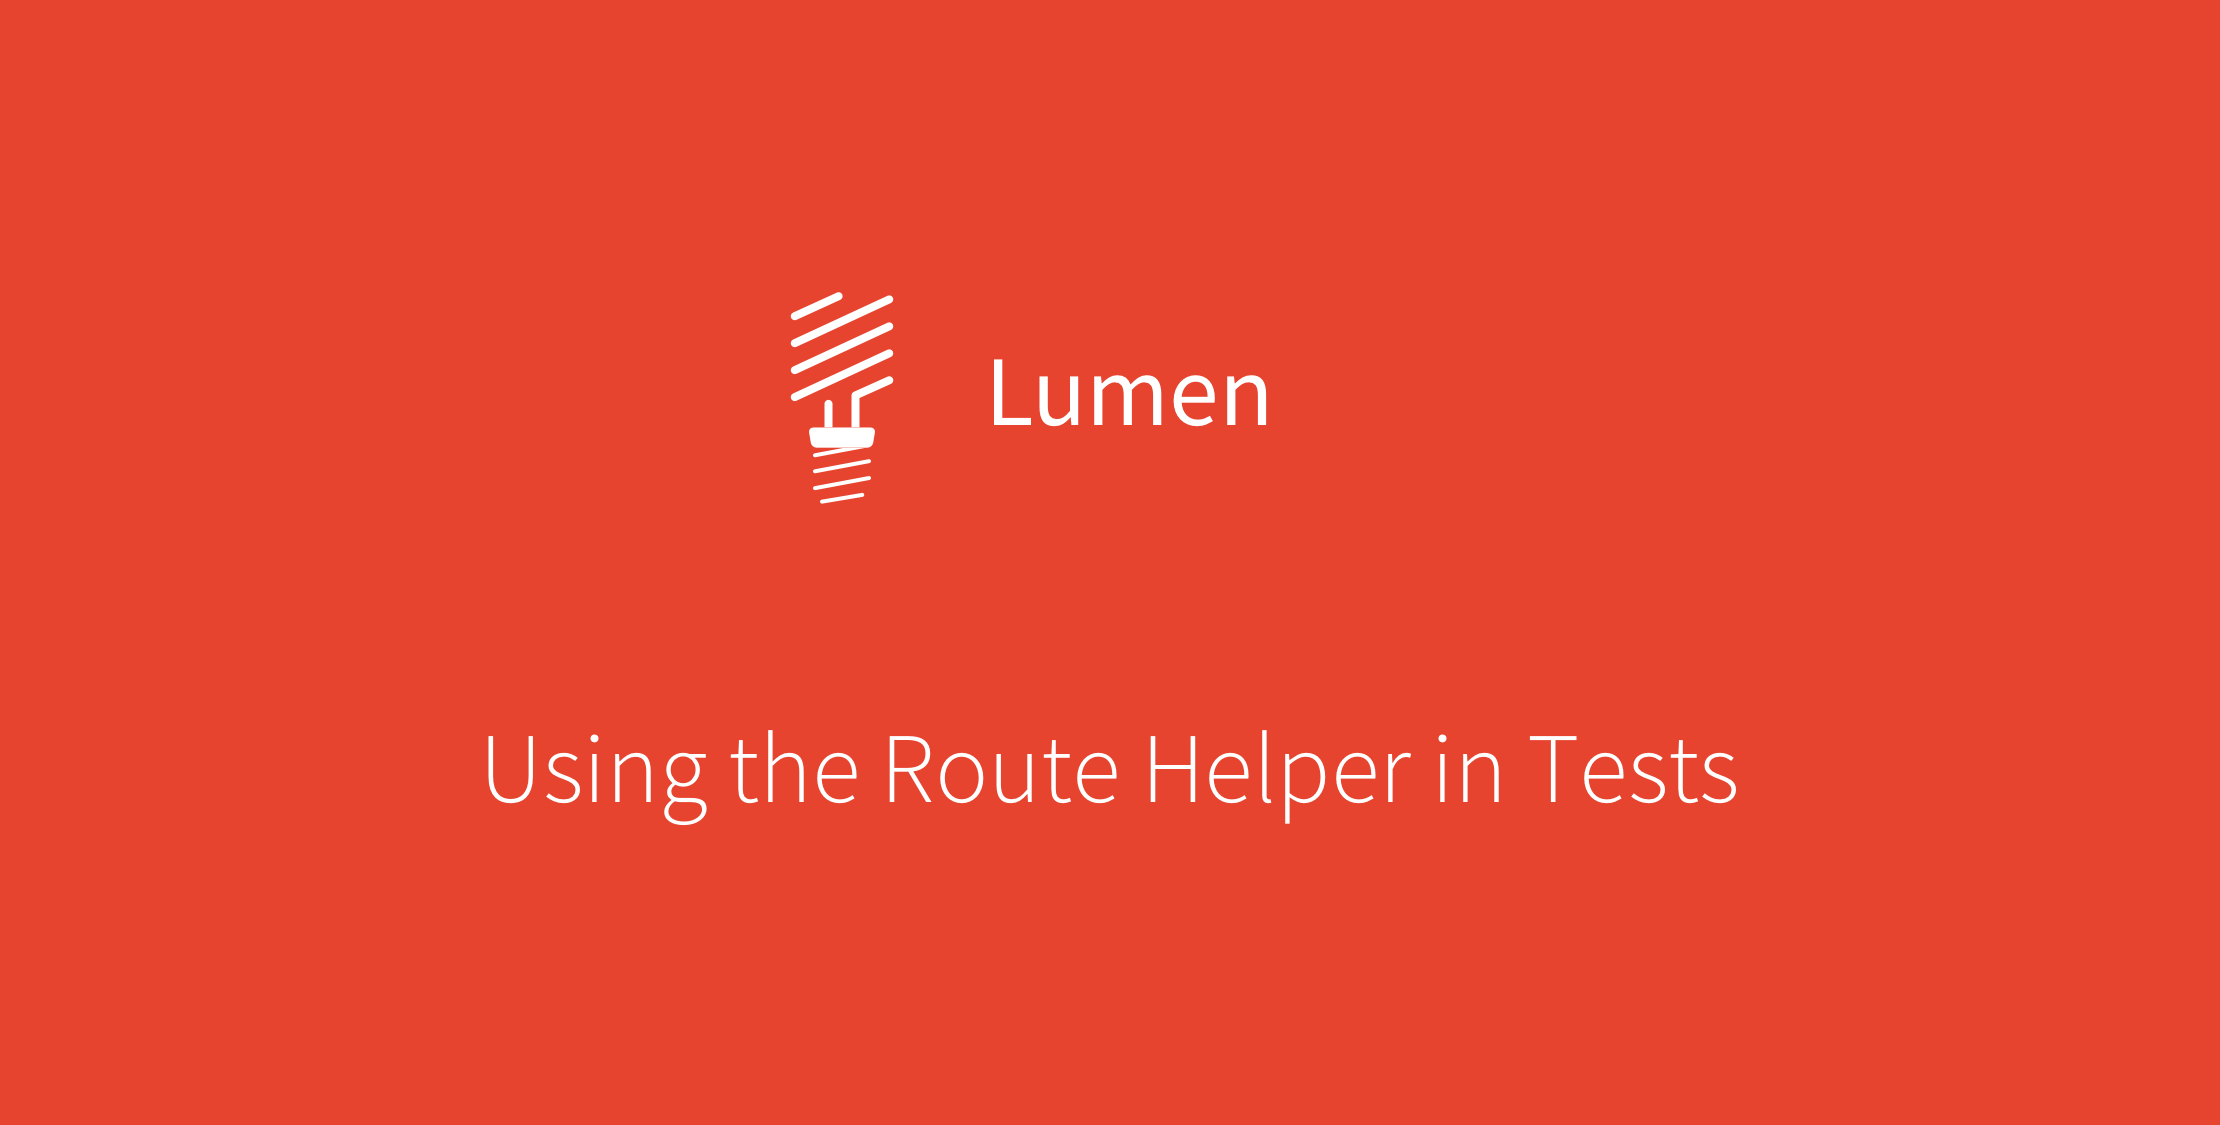 Using Named Routes in a Lumen Test image